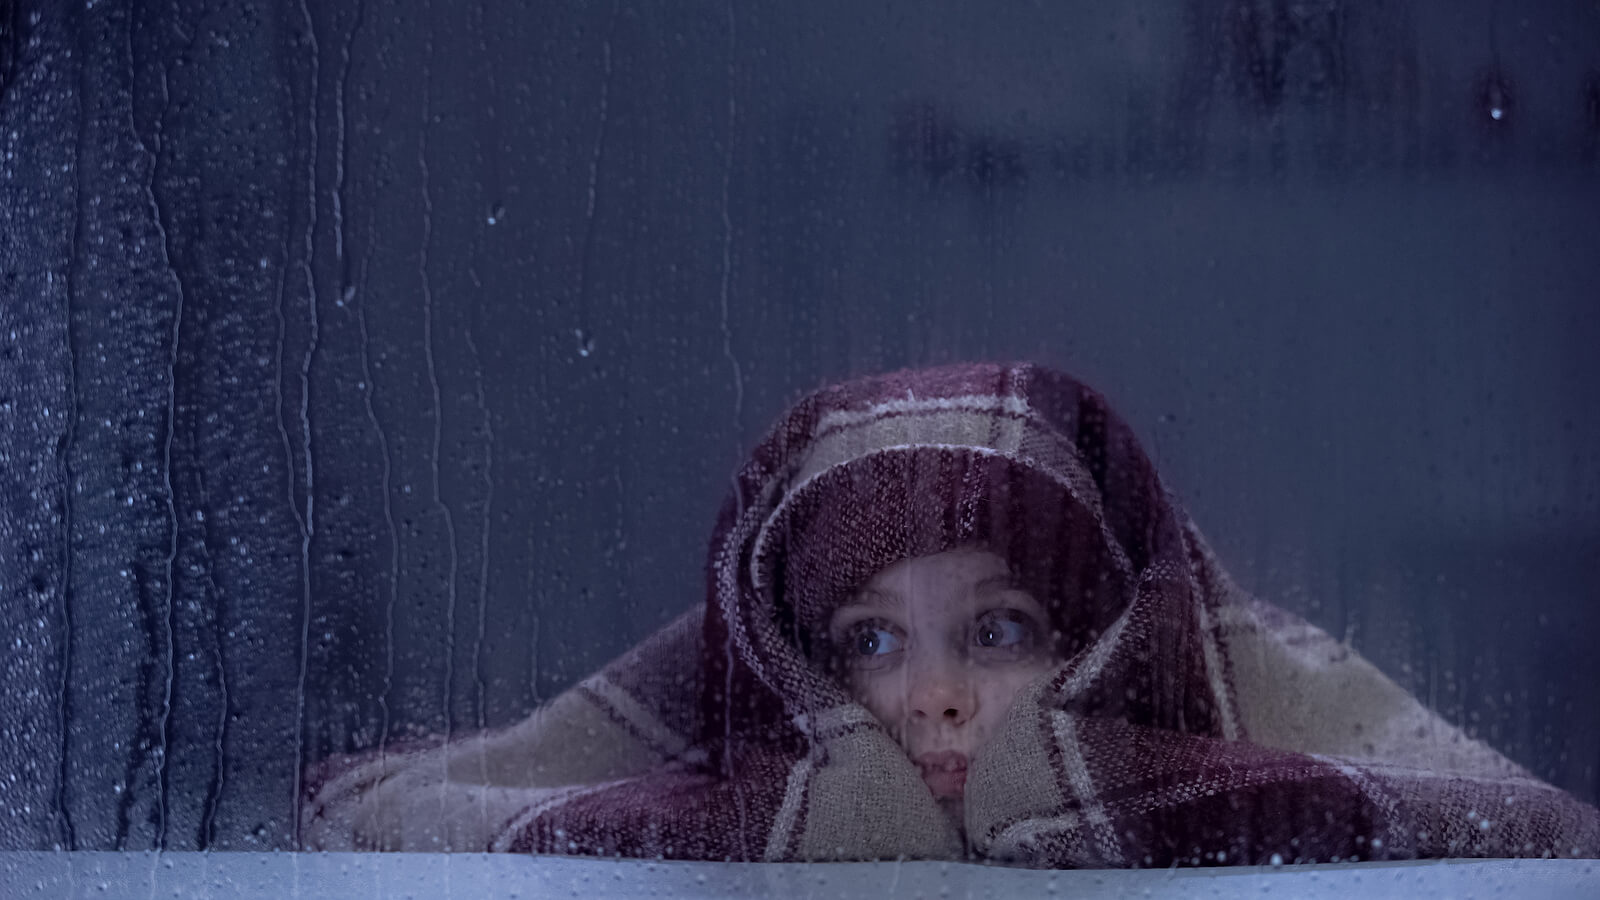 A child hiding under a blanket and looking out a window into the night rain.